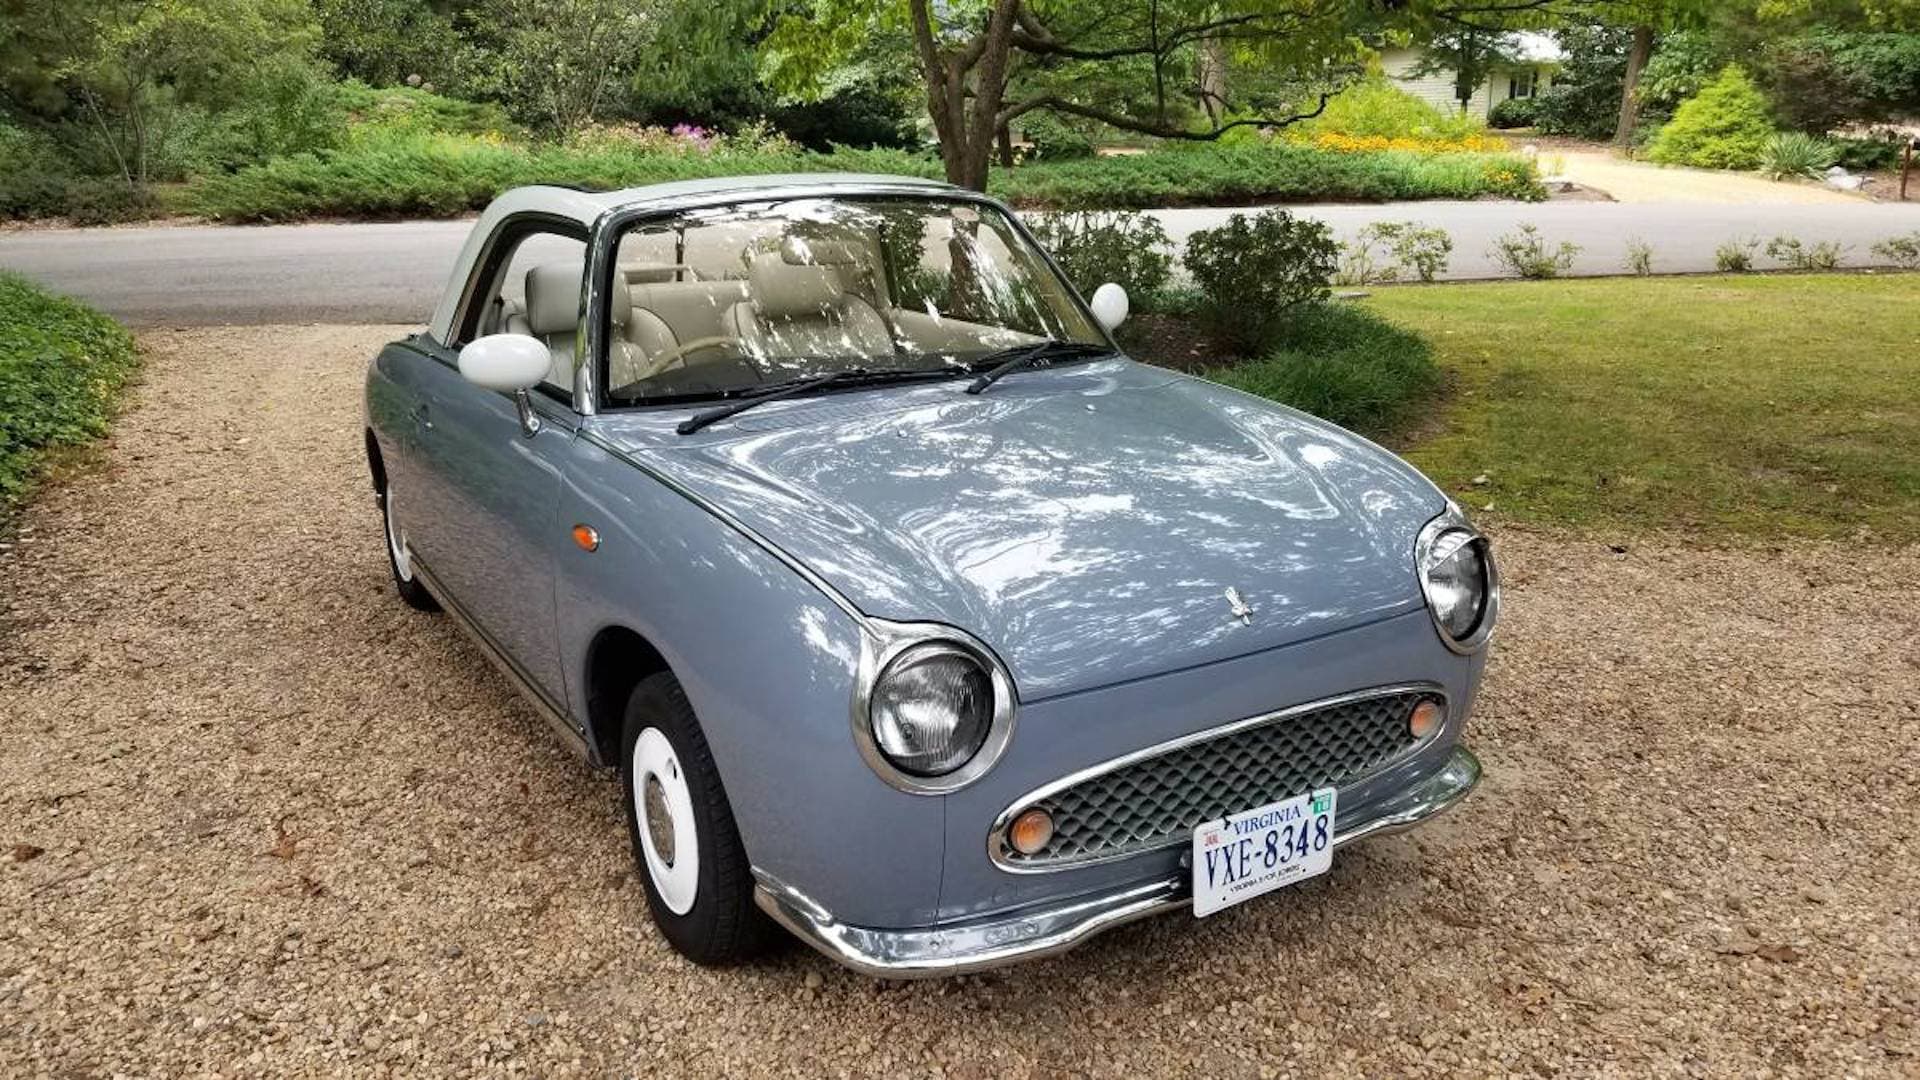 There’s an Adorable Nissan Figaro Import For Sale in Virginia